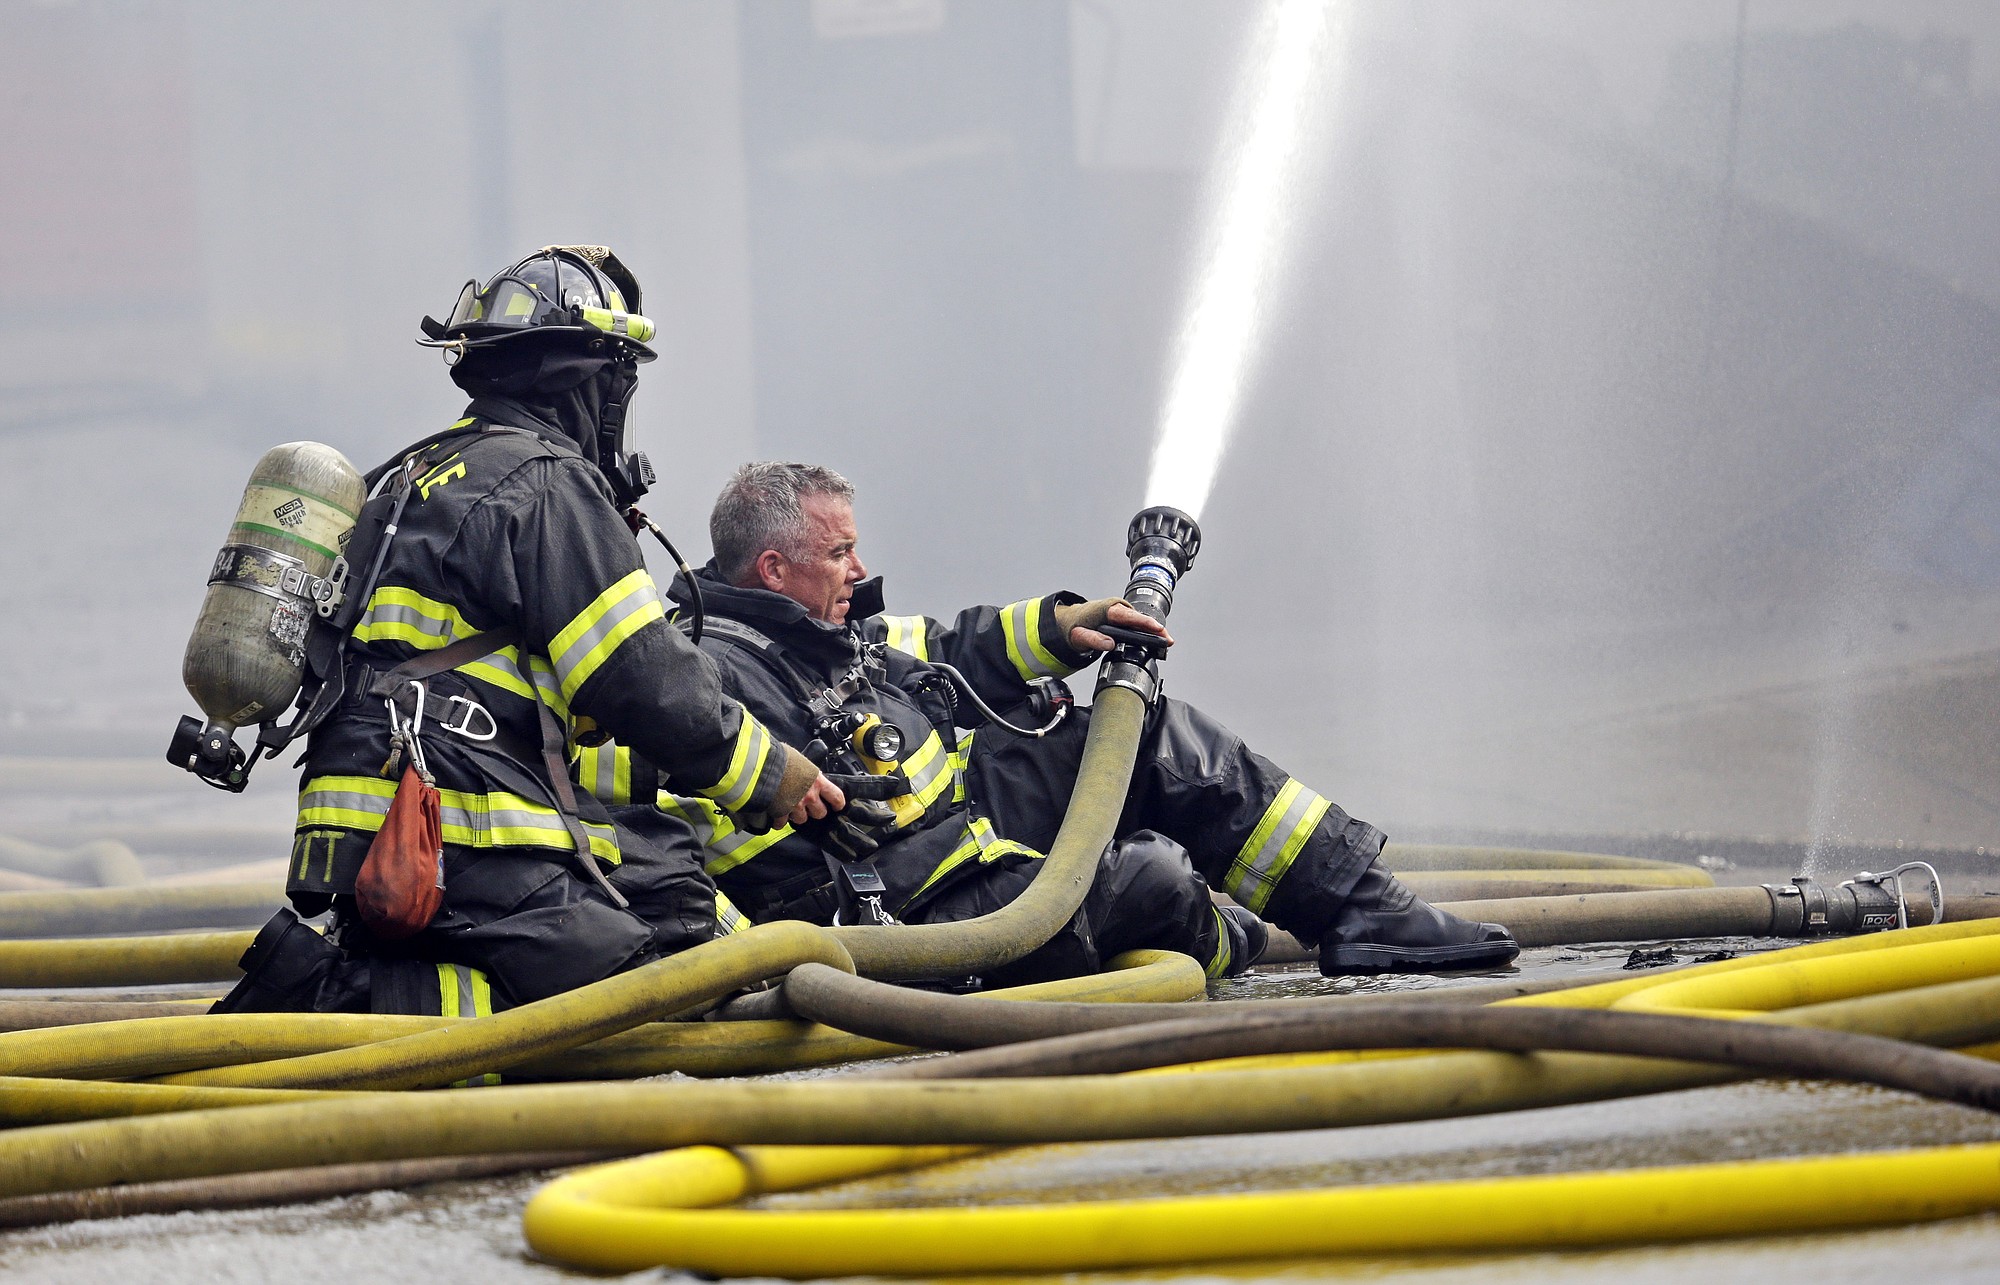 A firefighter briefly goes without his helmet as he prepares to put on a mask while hosing down a building on fire Tuesday in Seattle's Fremont neighborhood. No injuries were reported in the fire, which sent flames bursting through the roof of the building and created a large plume of smoke visible from downtown.